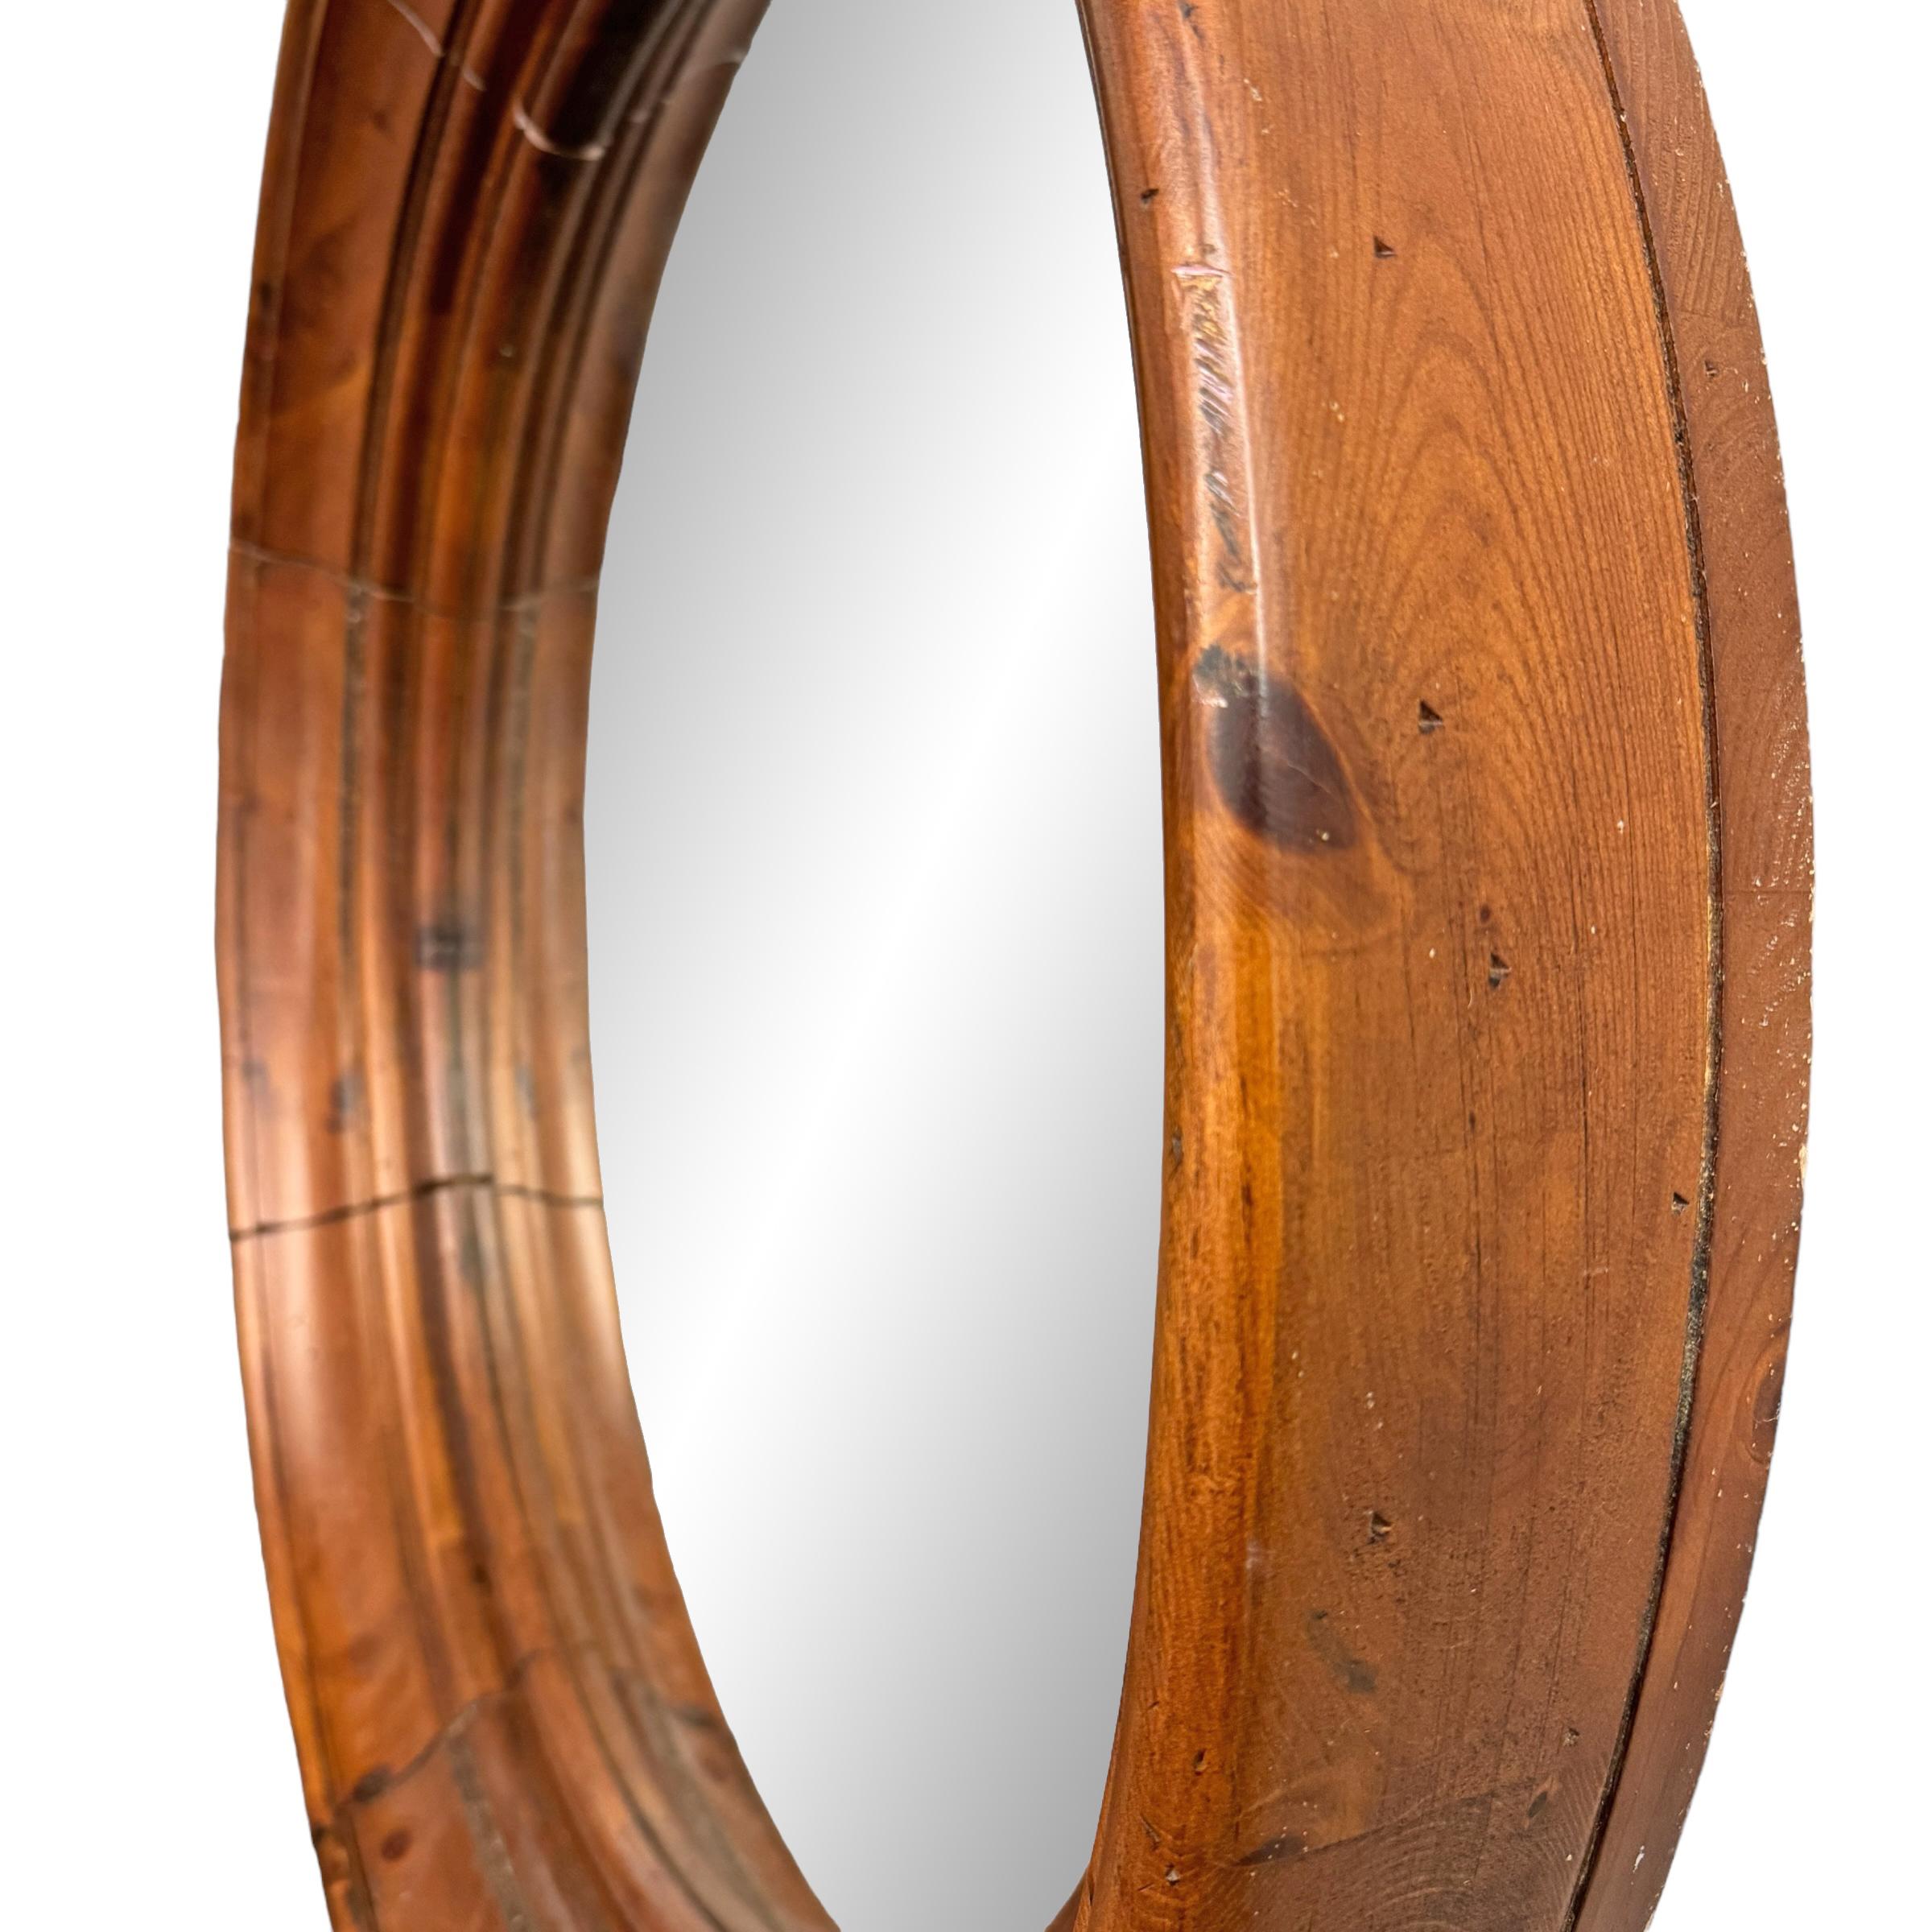 Rather Large Round Framed Mirror In Good Condition For Sale In Chicago, IL